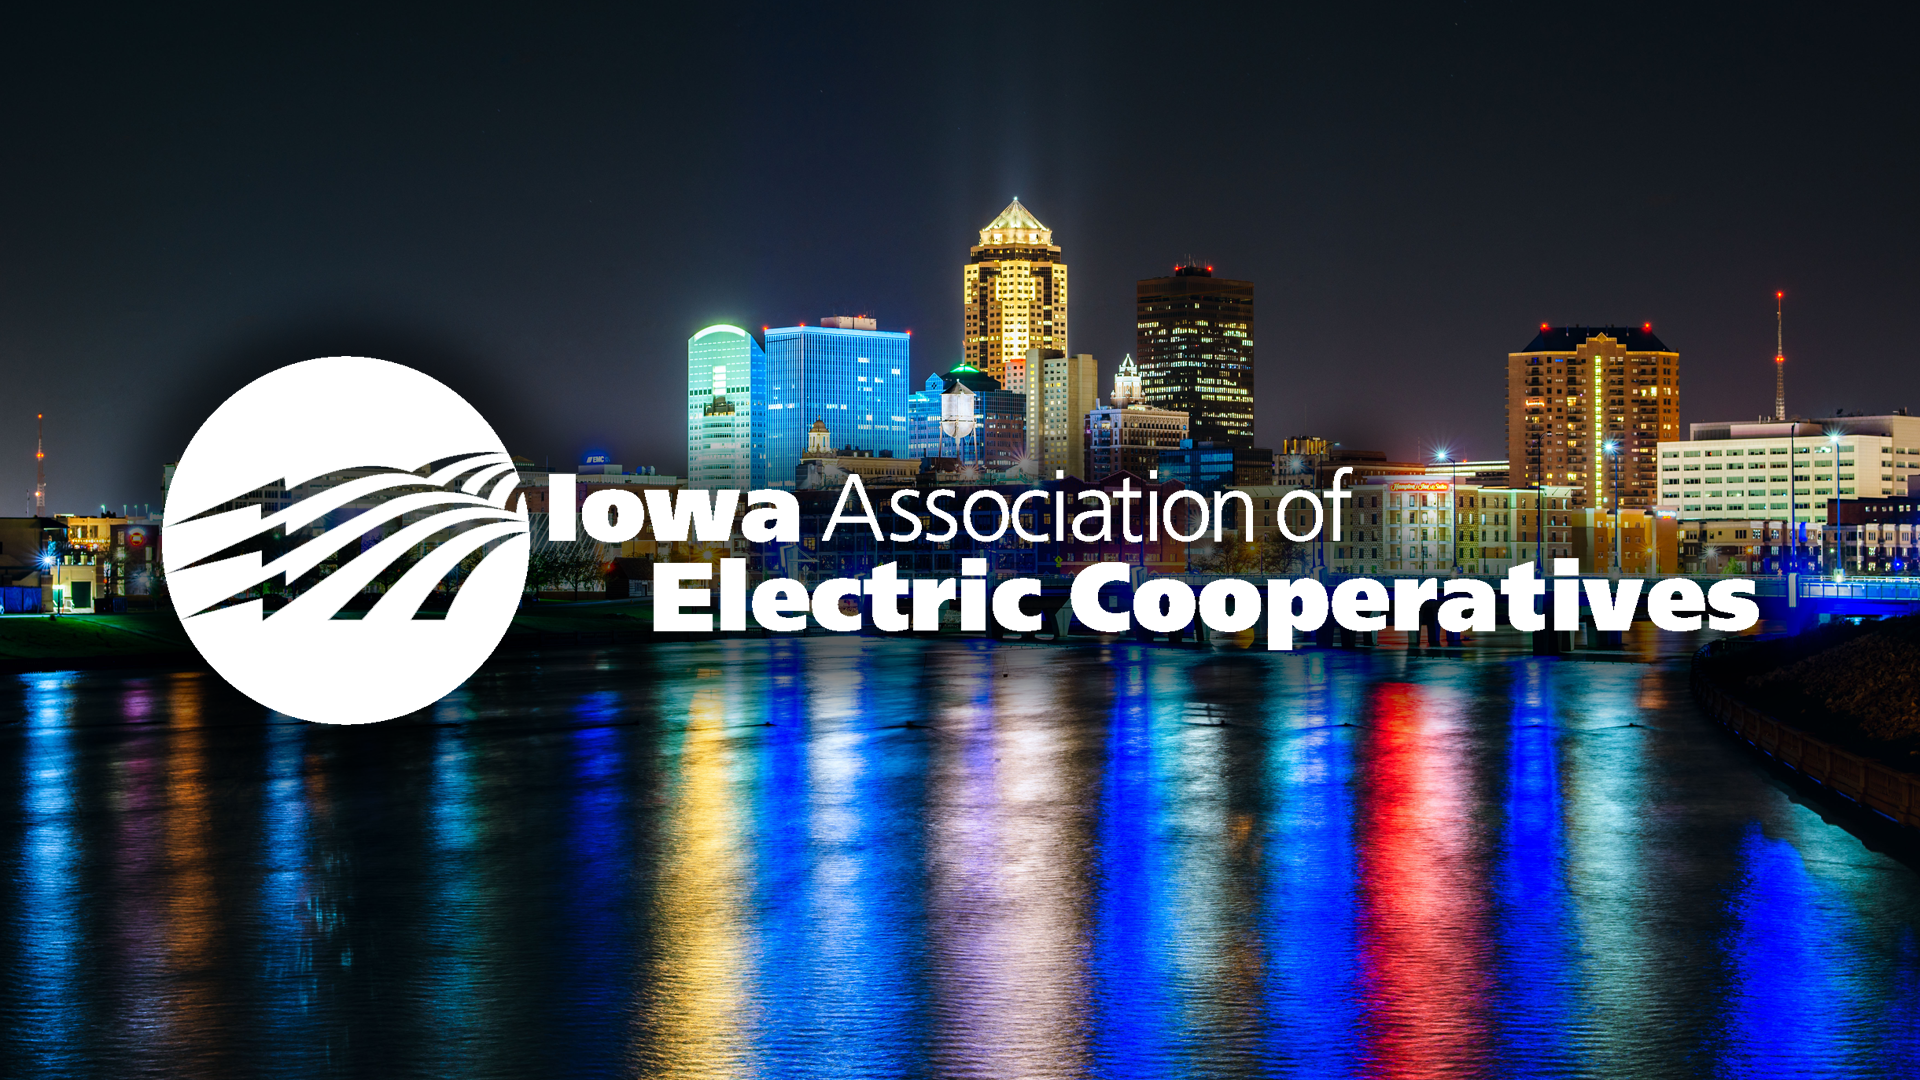 Iowa Association of Electric Cooperatives Winter Meeting